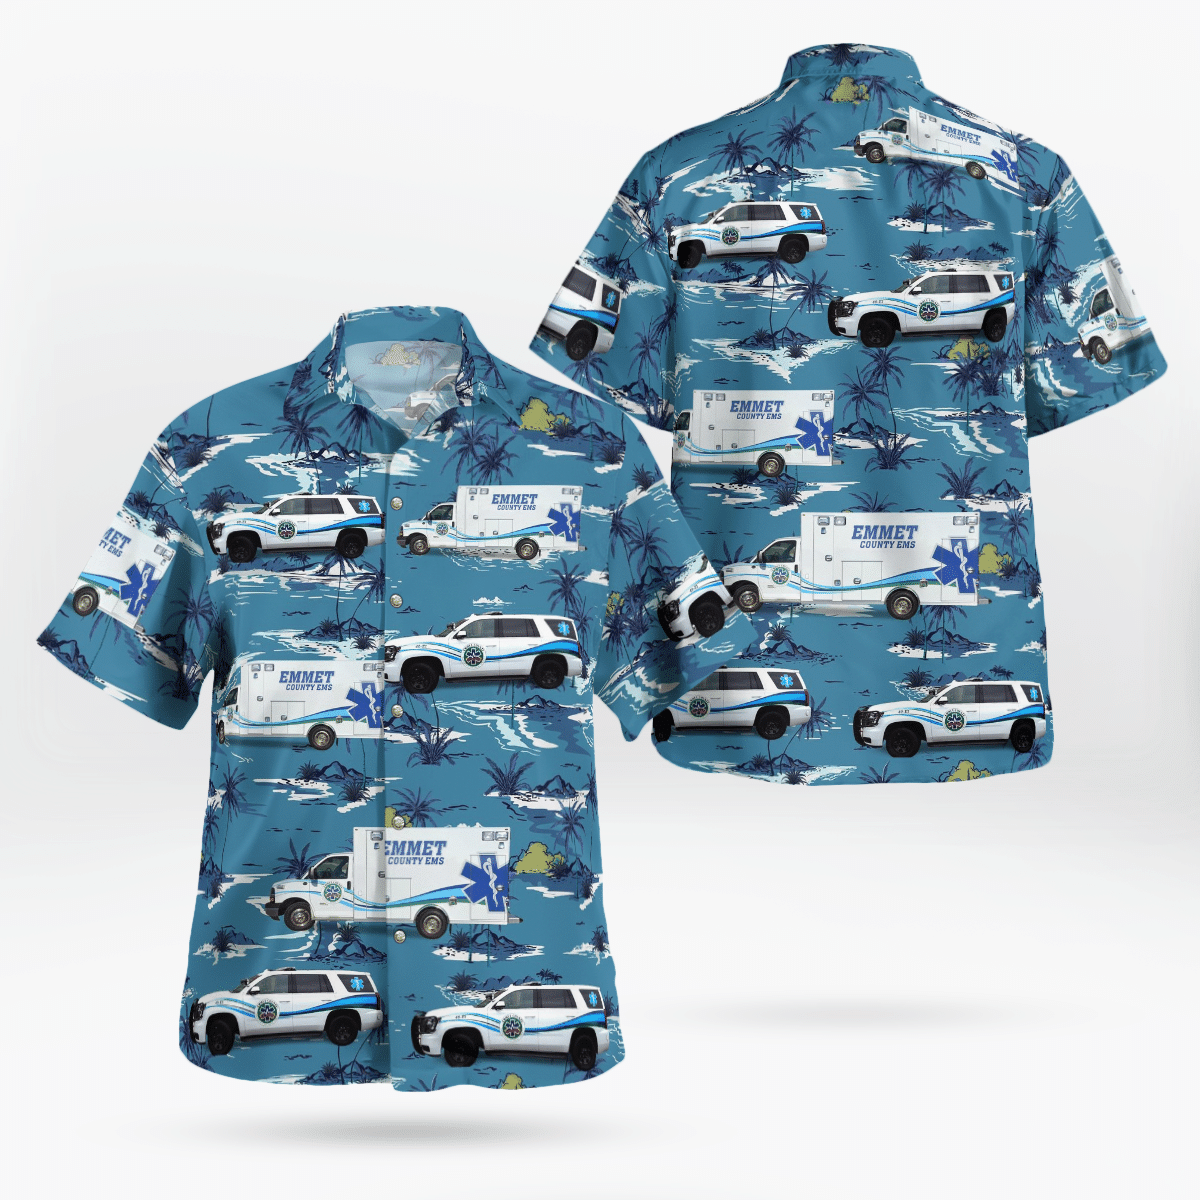 If you are in need of a new summertime look, pick up this Hawaiian shirt 28